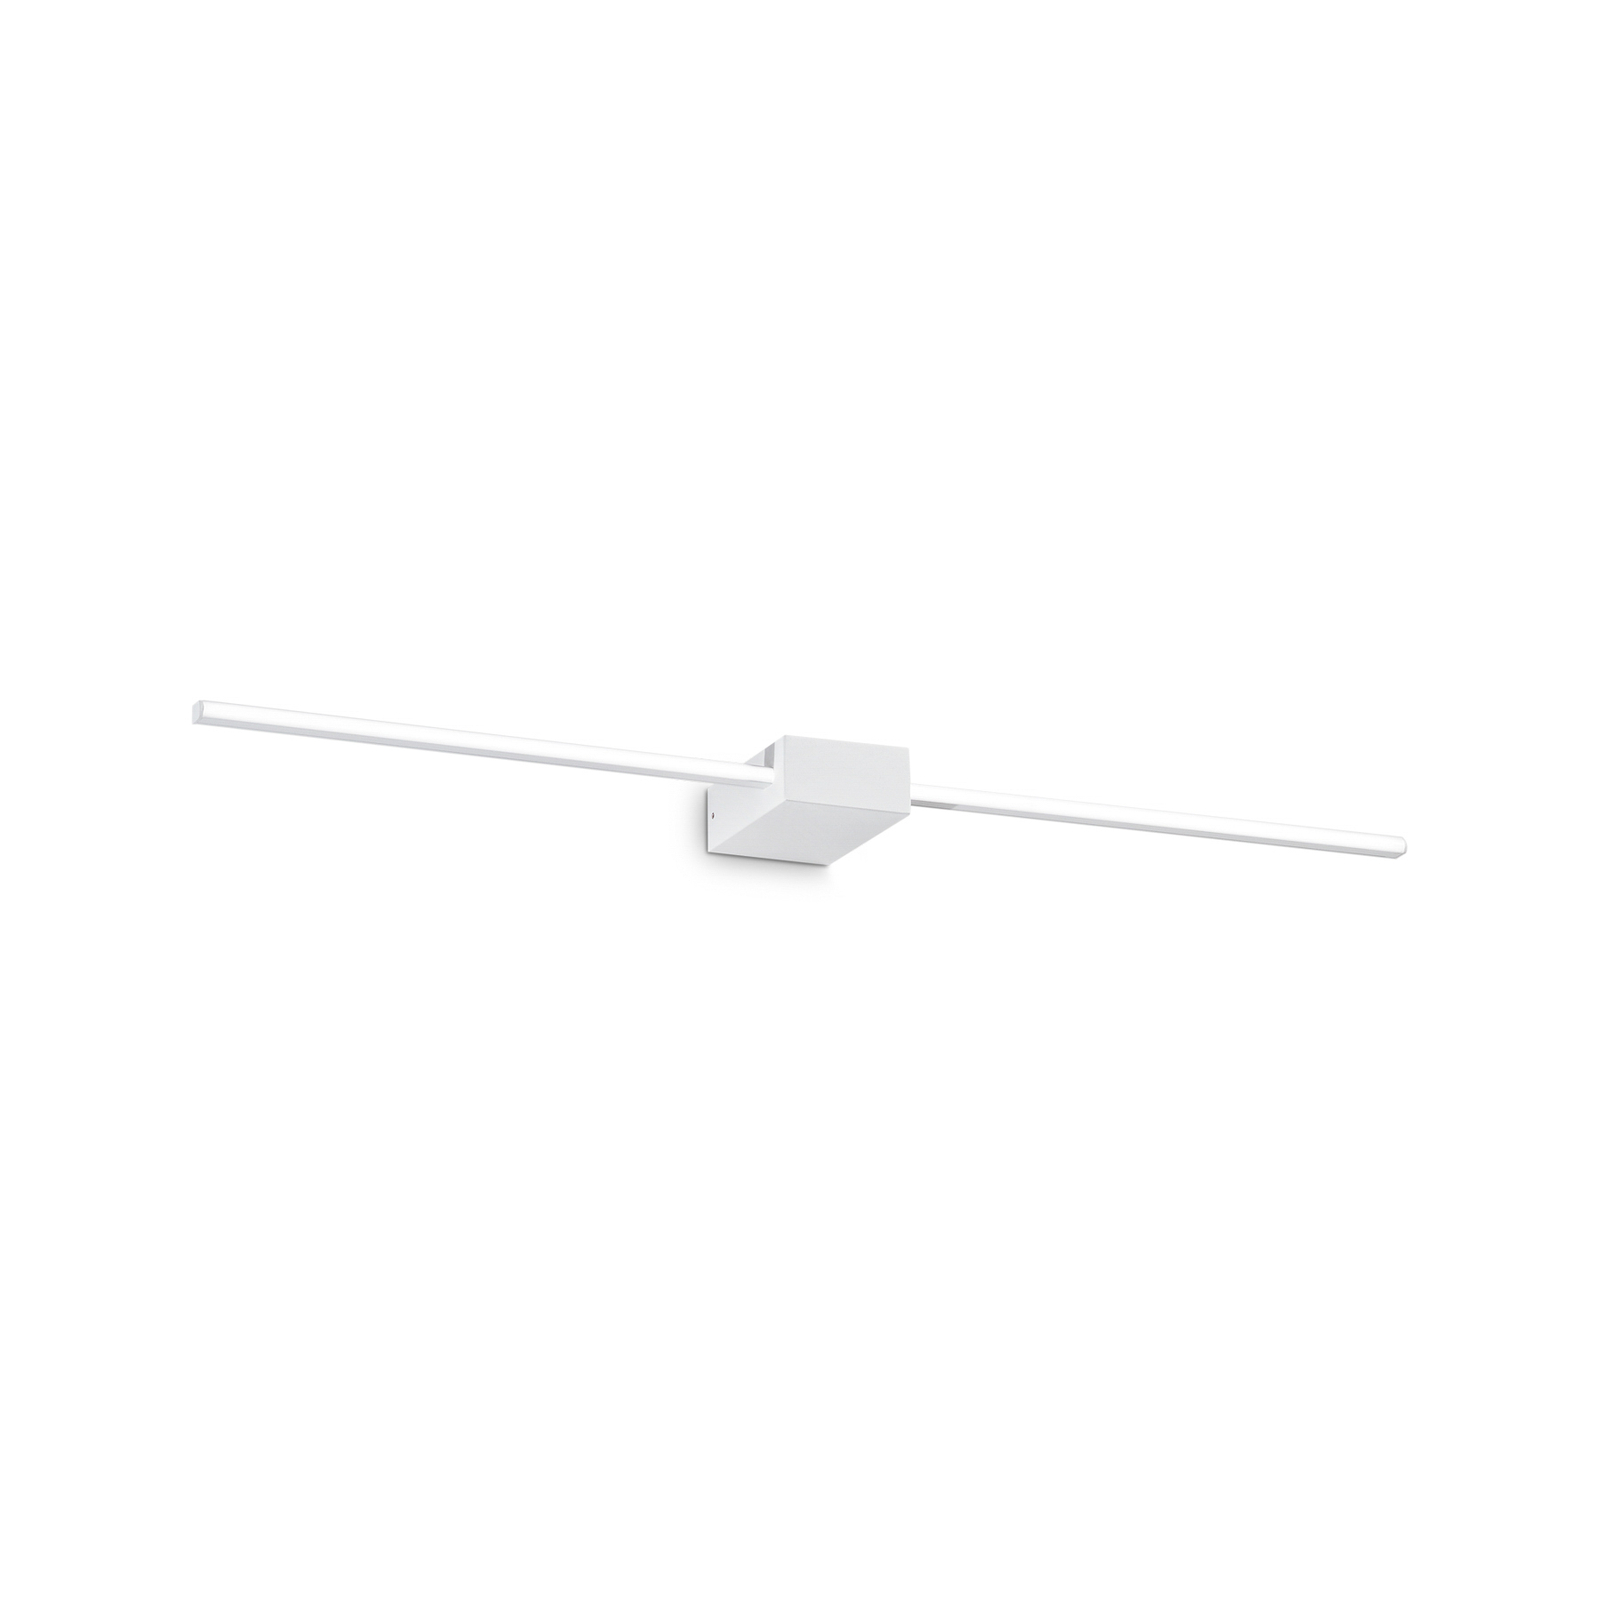 Ideal Lux LED wall light Theo, white, width 75 cm aluminium